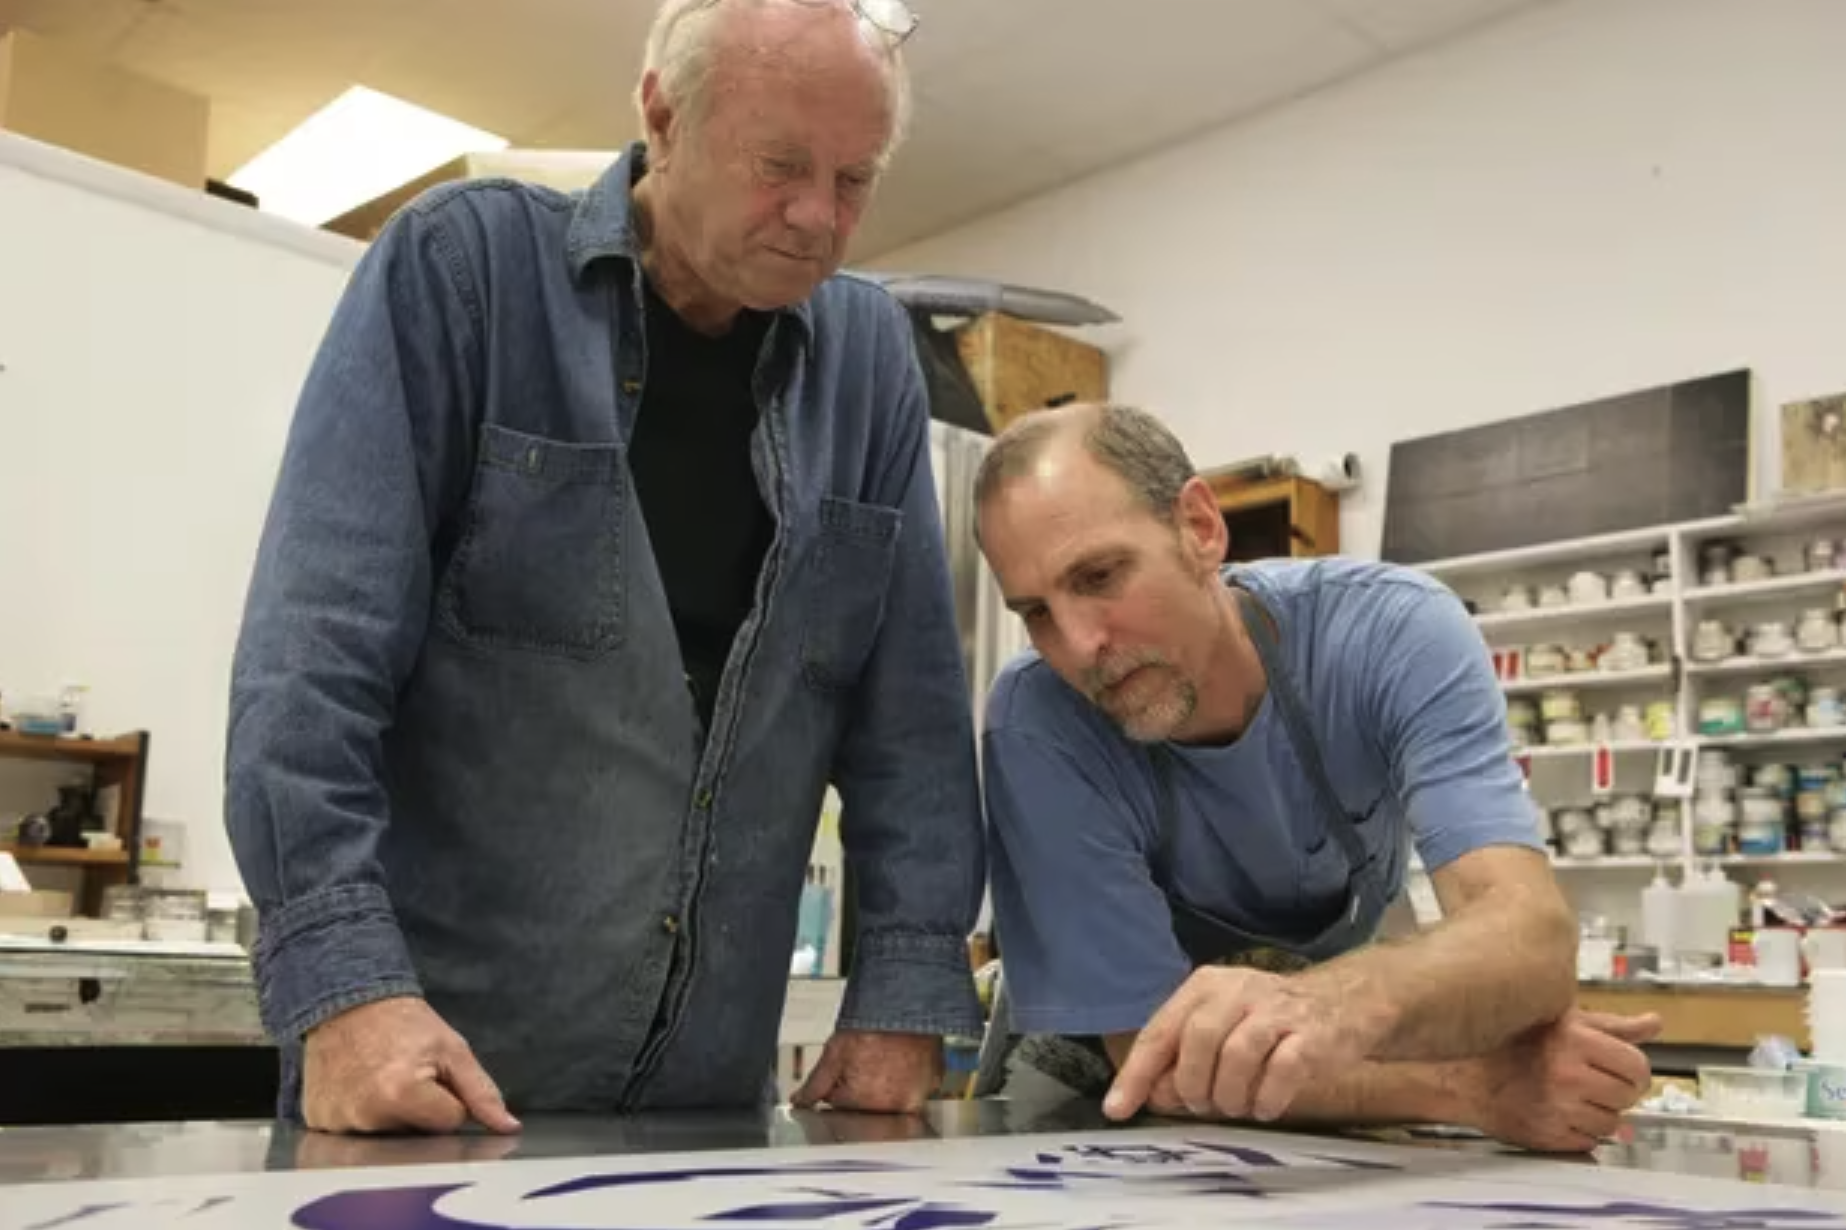 James Rosenquist, left, one of the leading proponents of the pop art movement, is shown here working with Tom Pruitt, the master printer and studio manager of Graphicstudio at the University of South Florida in Tampa. Rosenquist, who died in 2017, had a studio in Hernando County. [Graphicstudio]